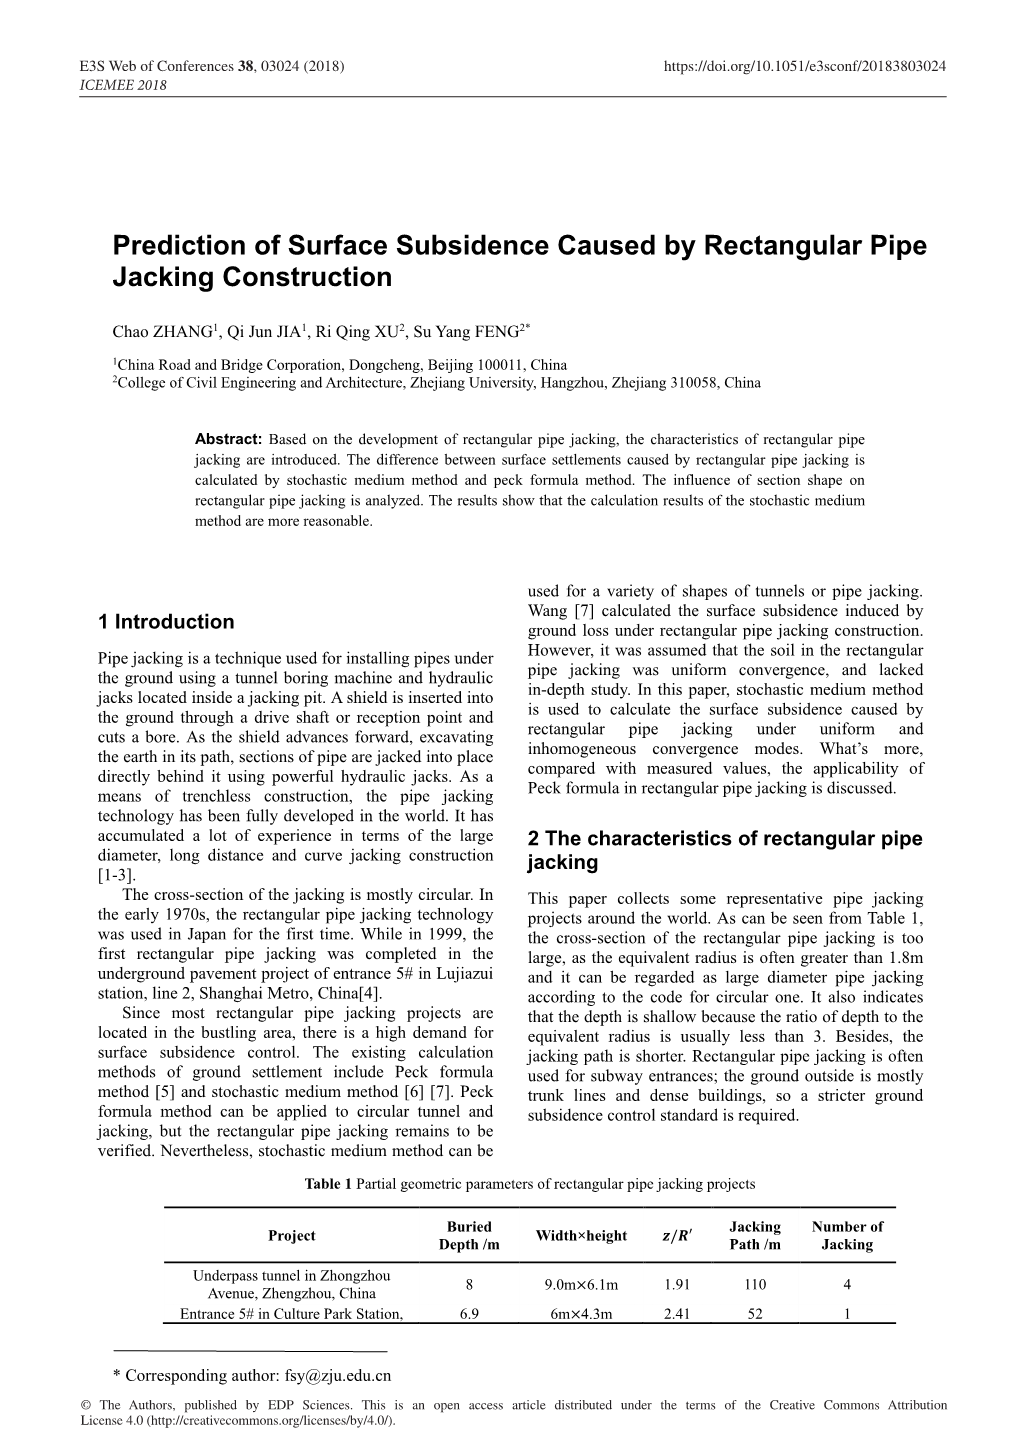 Prediction of Surface Subsidence Caused by Rectangular Pipe Jacking Construction